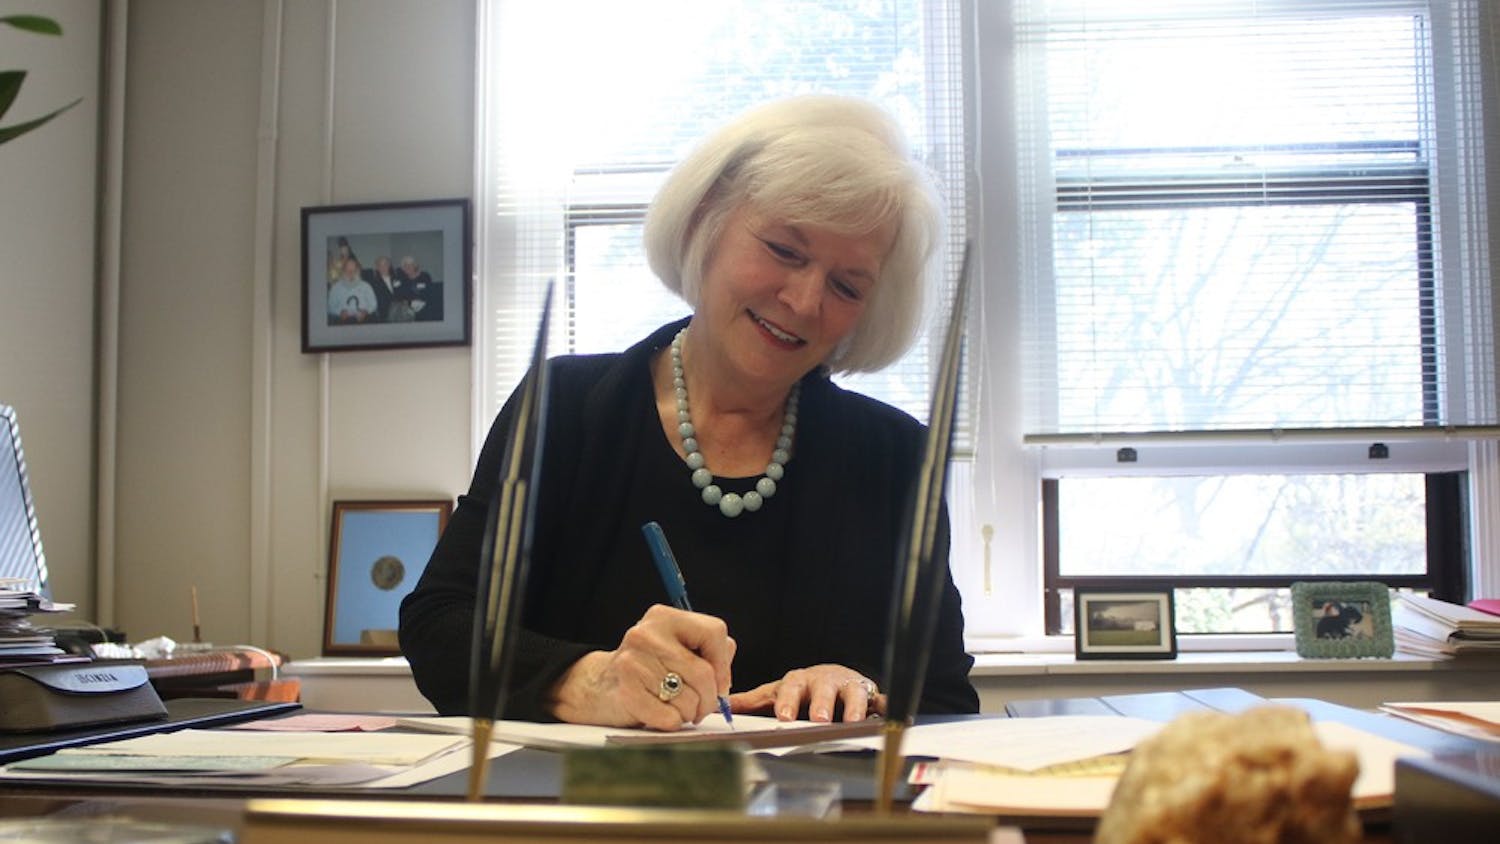 Shirley Ort, director of scholarships and student aid,&nbsp;is planning to retire this summer.